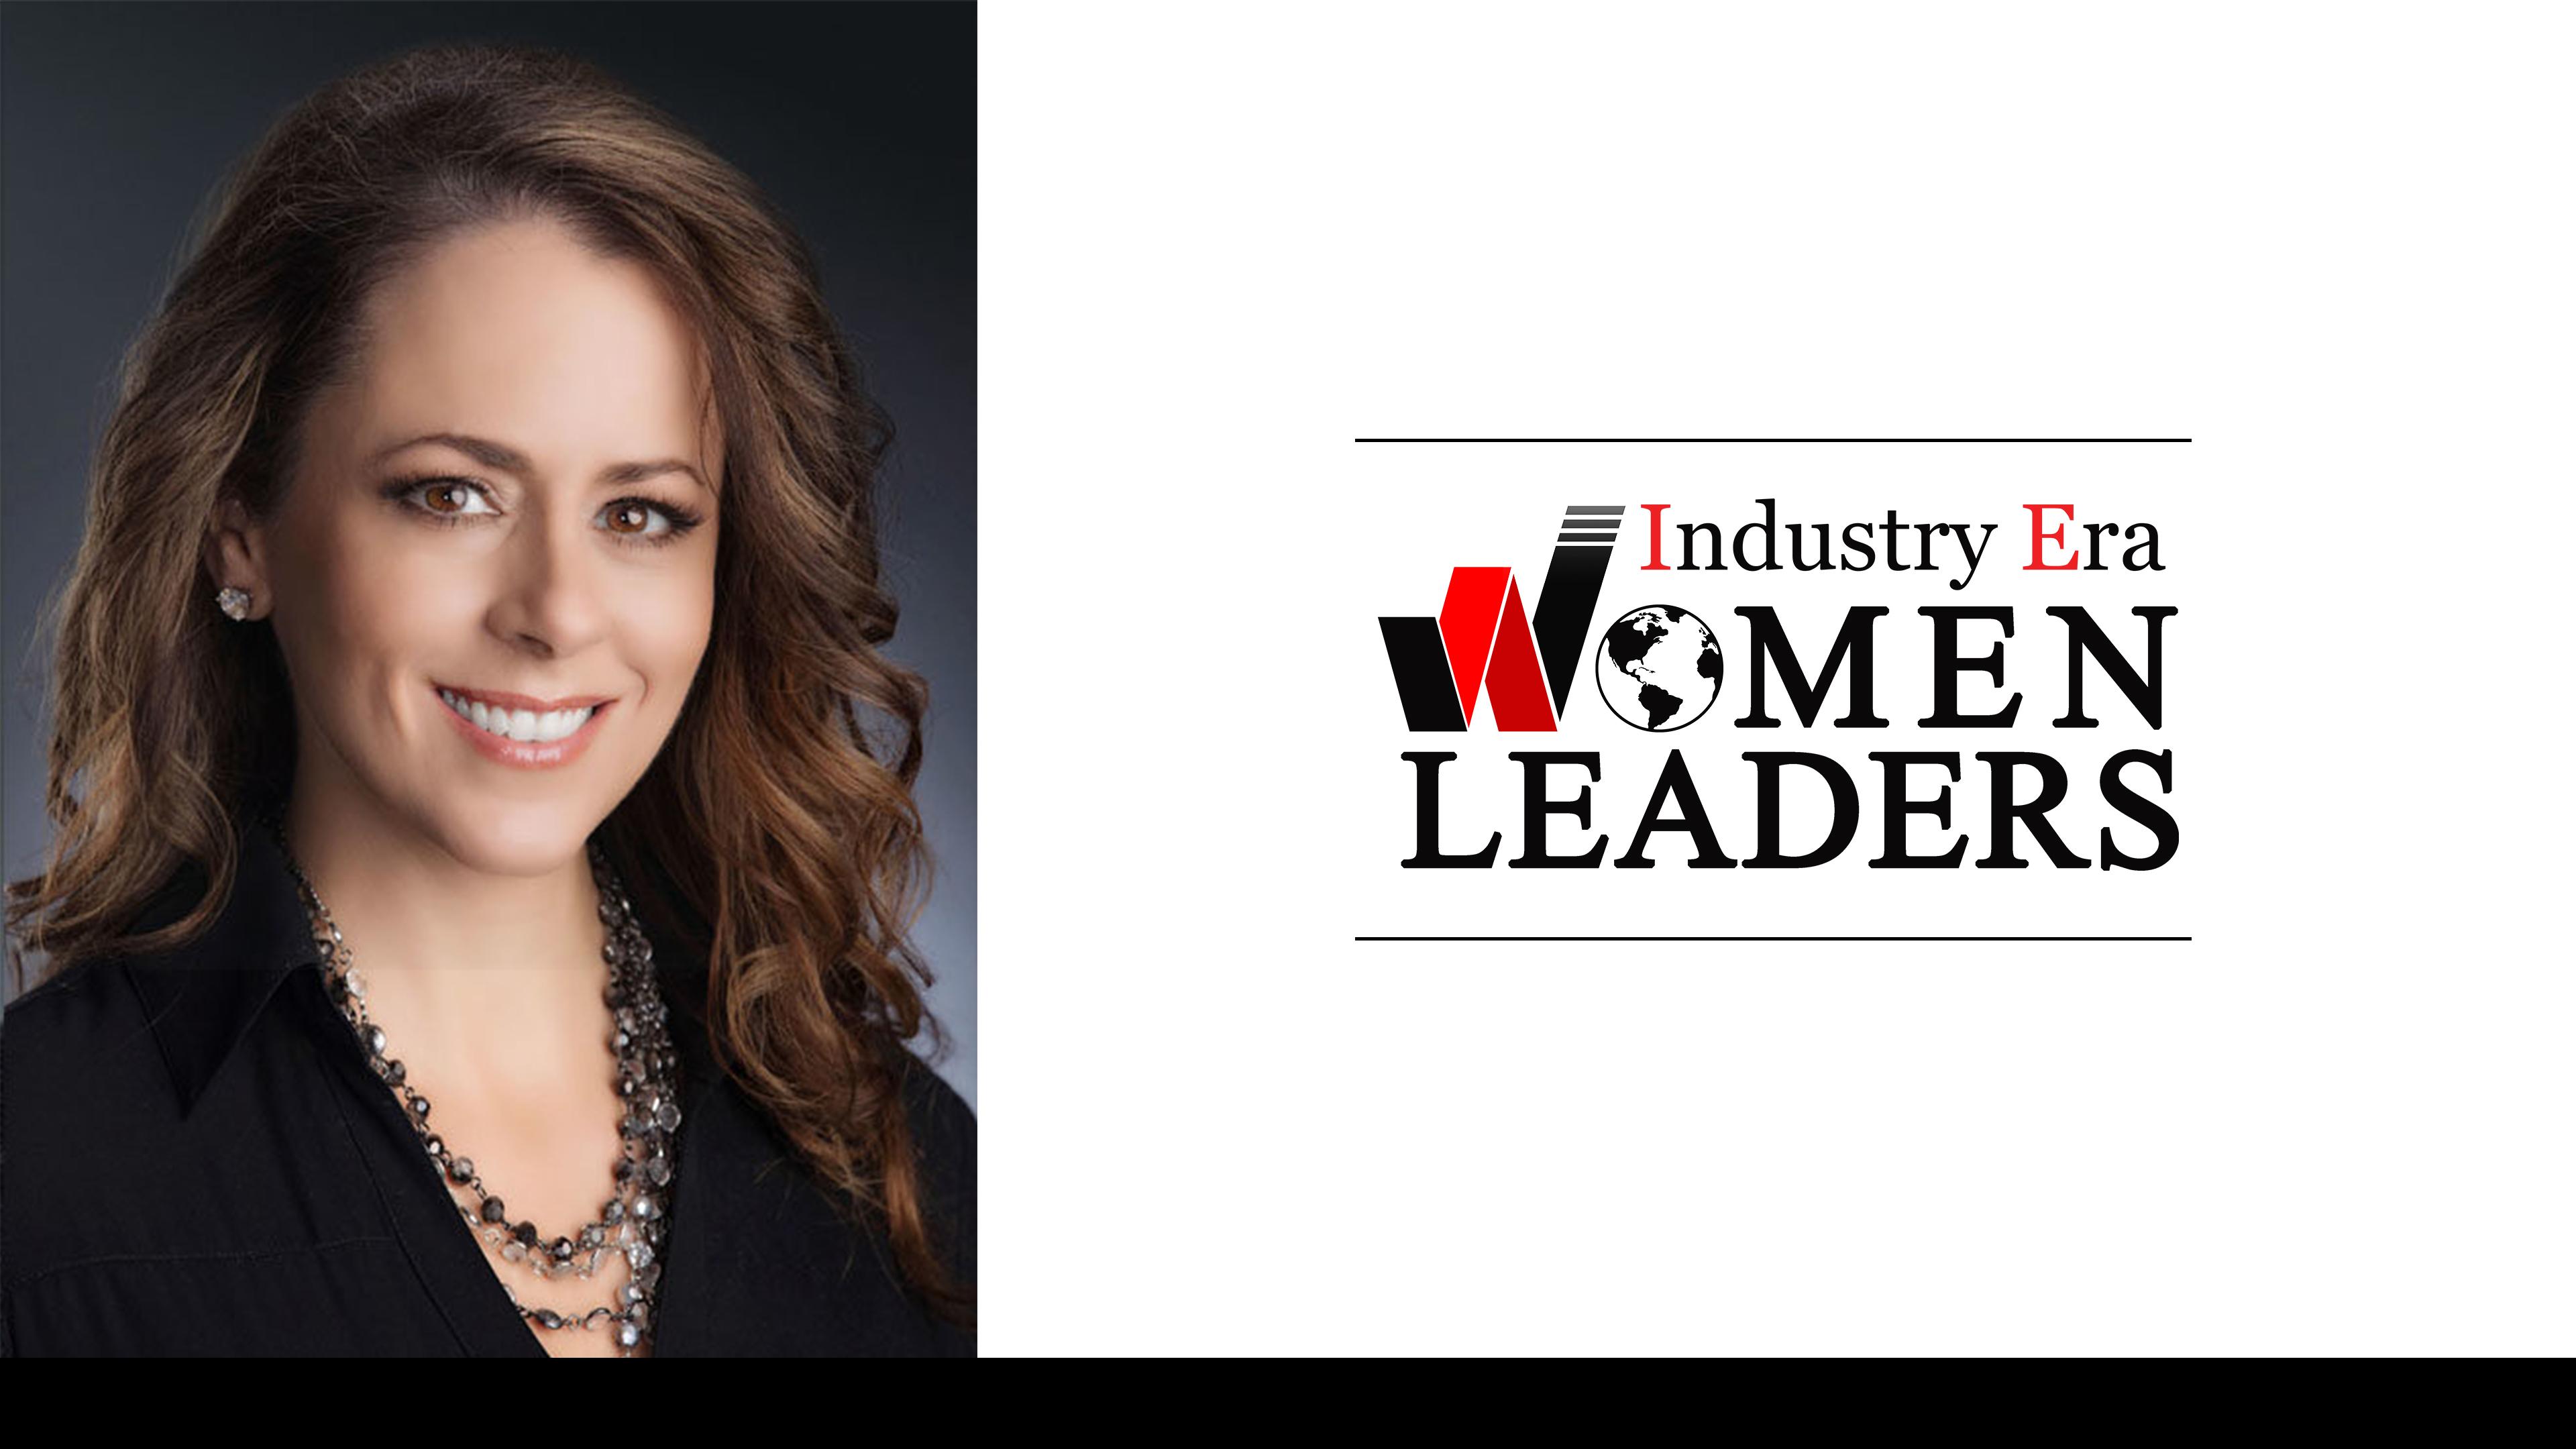 Switch News: Missy Young Named in IERA Women Leaders 10 Best CIOs of 2021